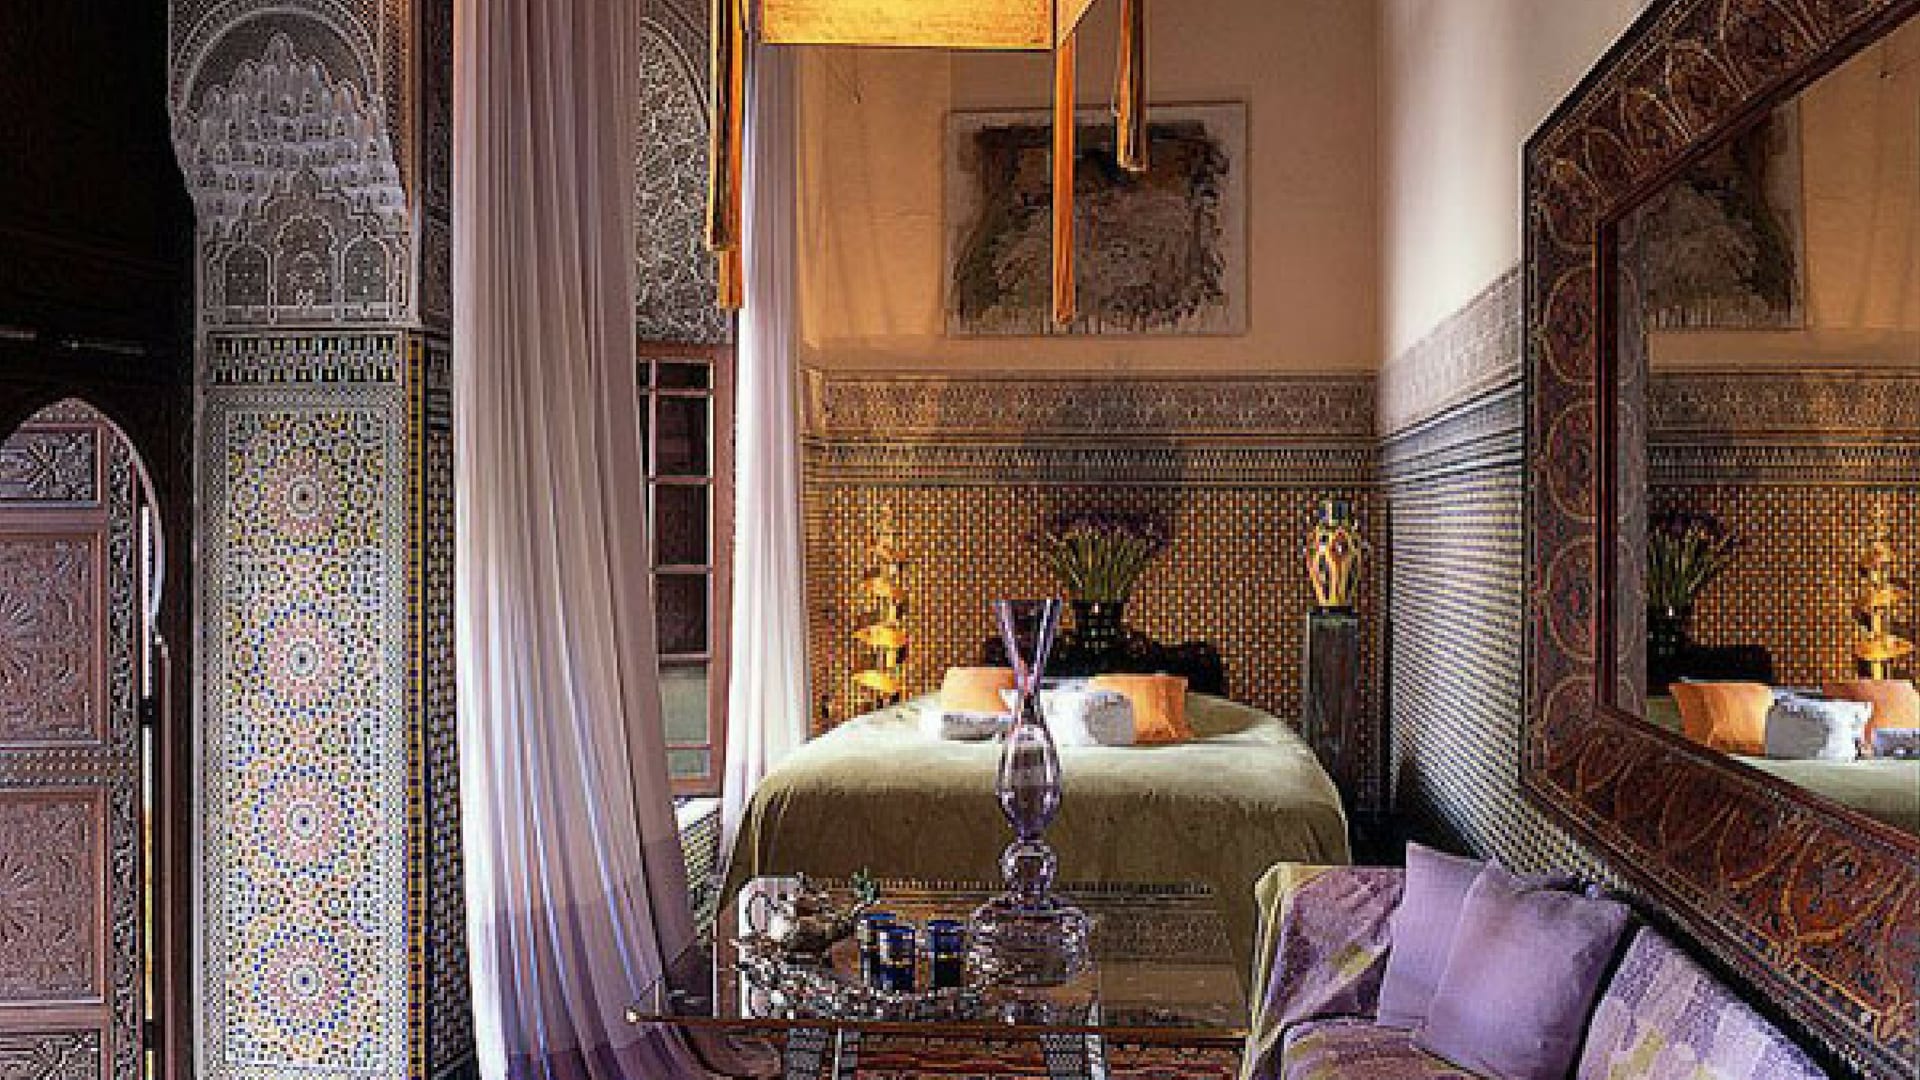 A lavender bedroom at Riad Enija with diaphanous curtains